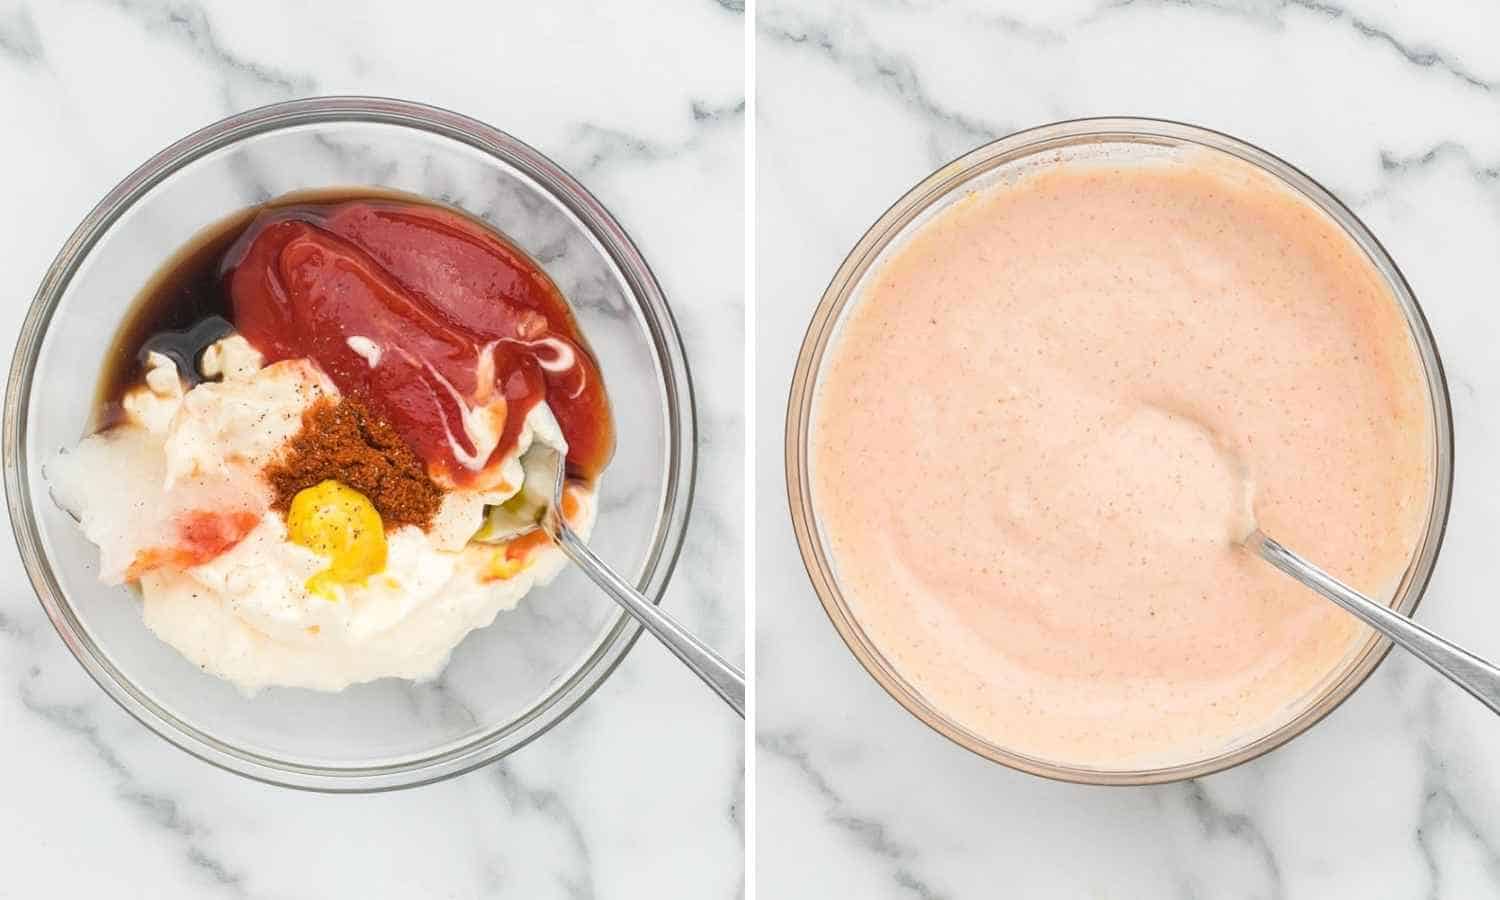 Two images showing how to mix up ingredients to make the Russian dressing